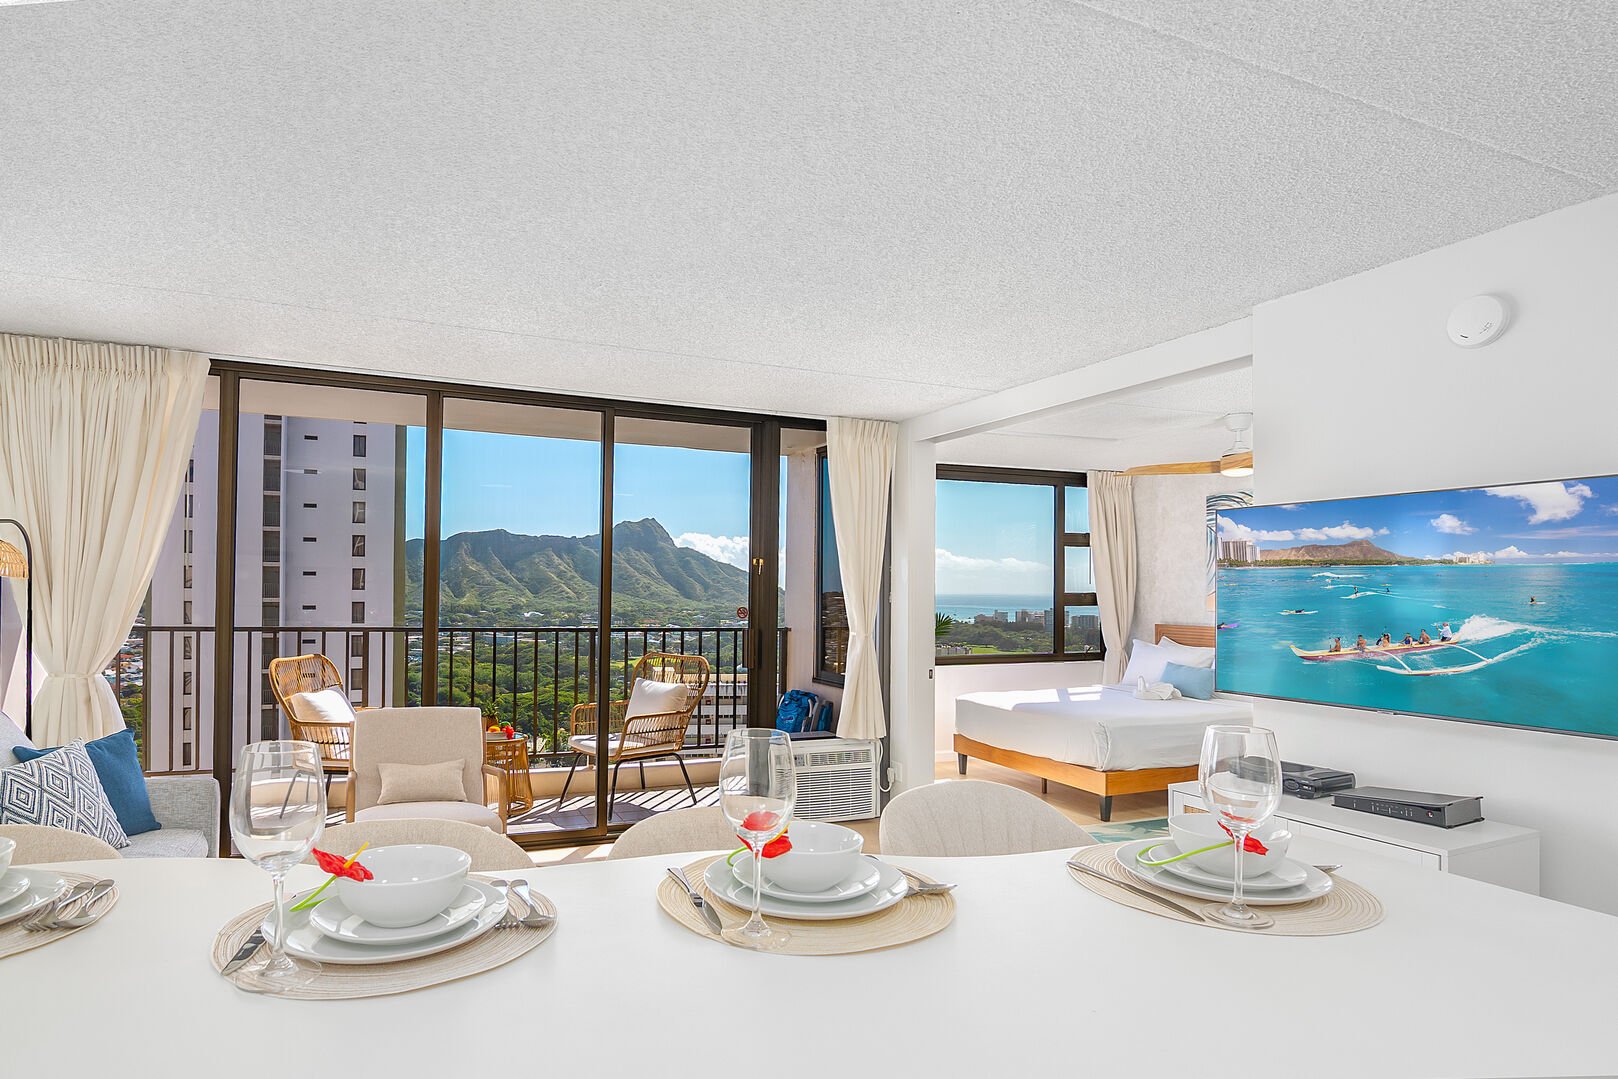 An overview of the condo with the stunning diamond head view.